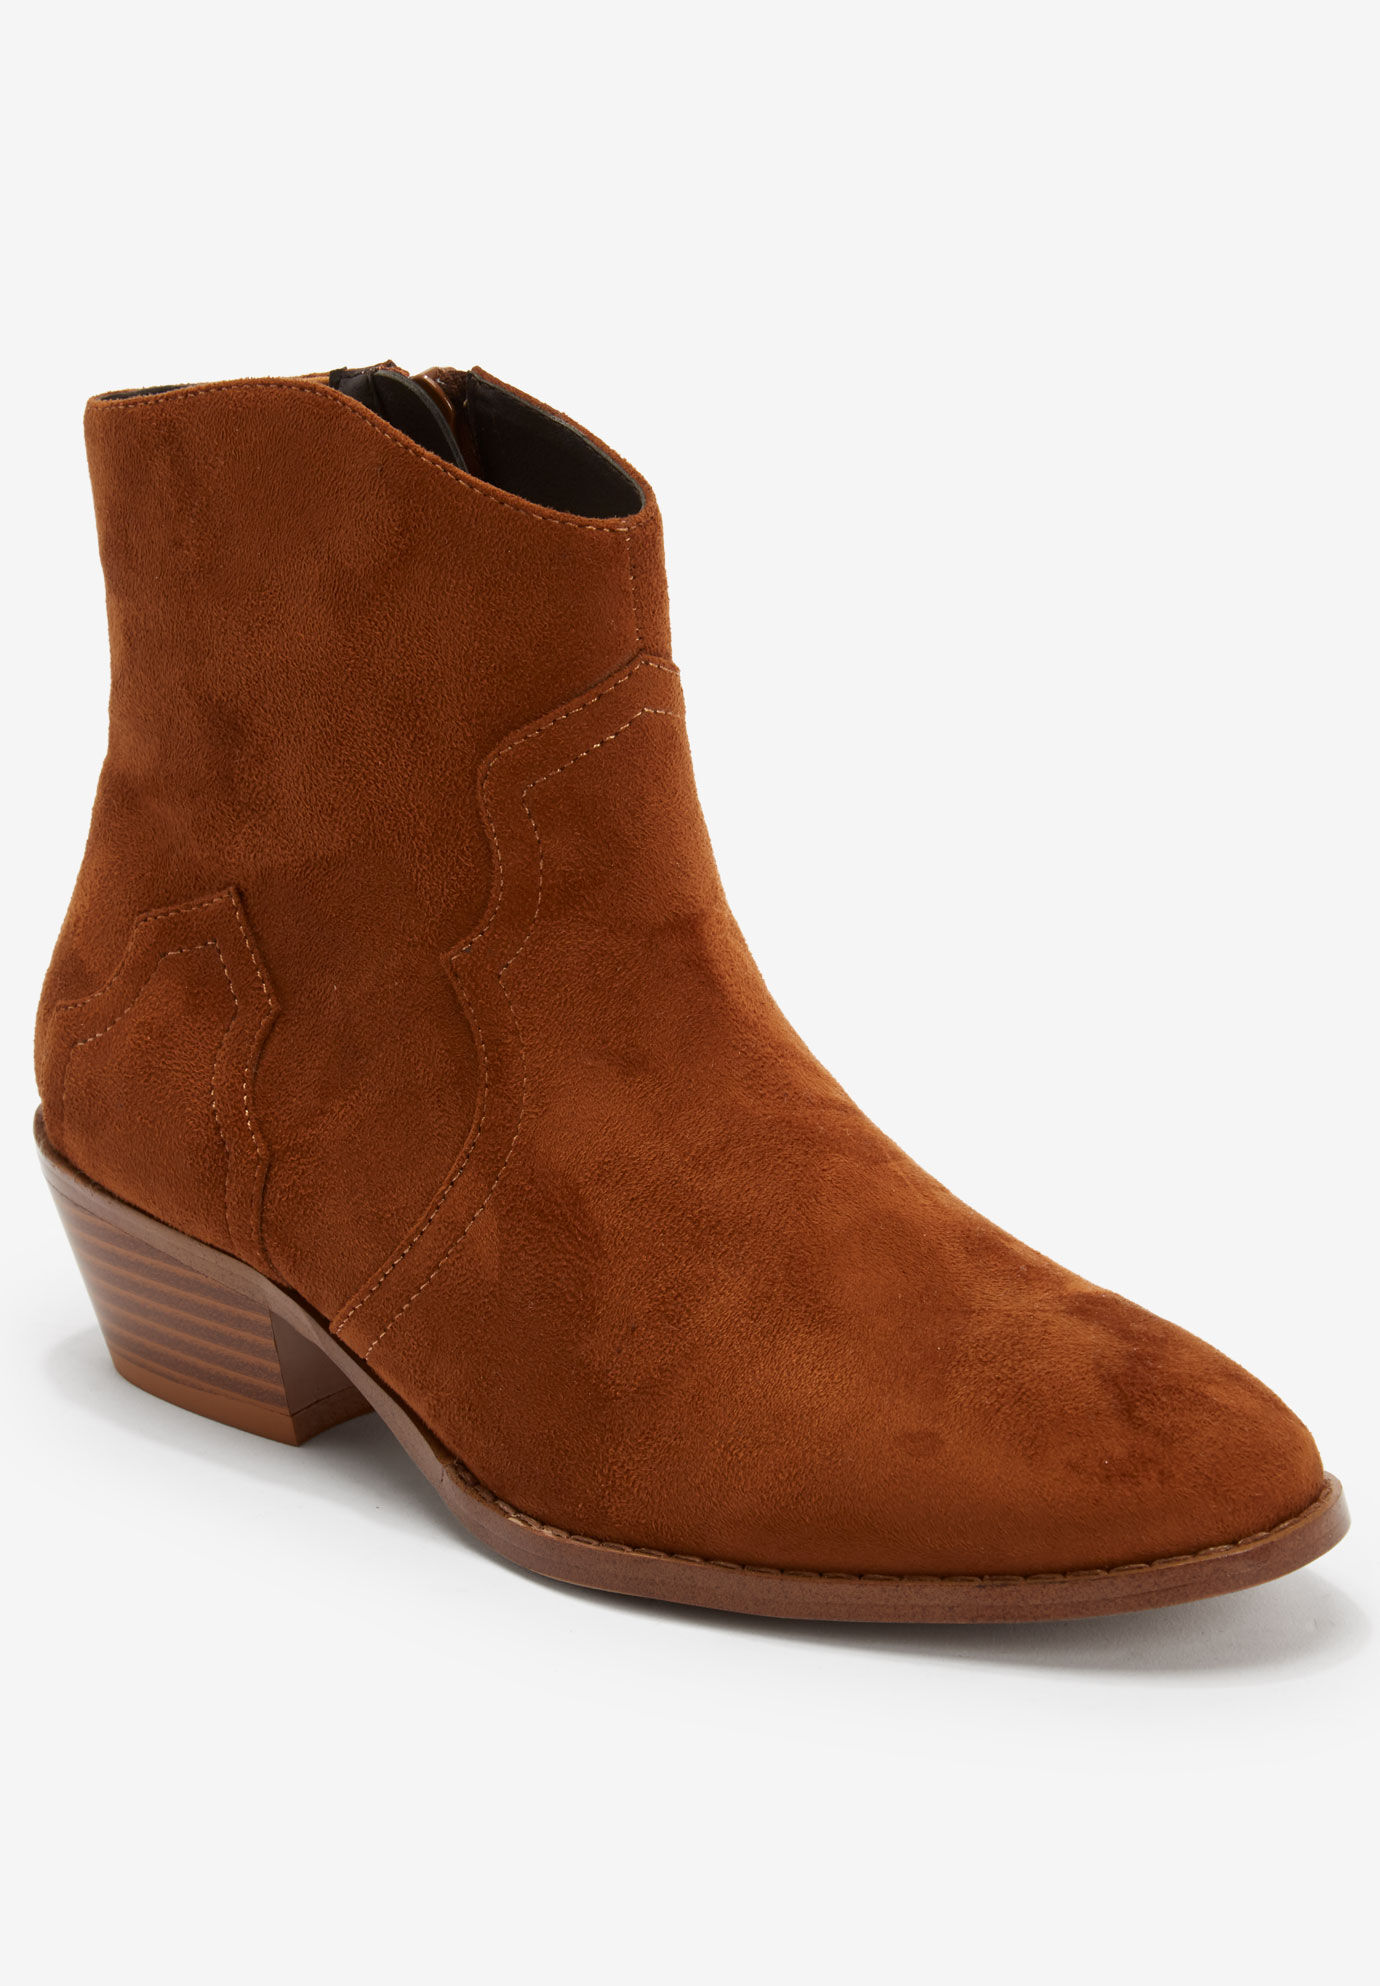 Ankle Boots \u0026 Booties | Jessica London